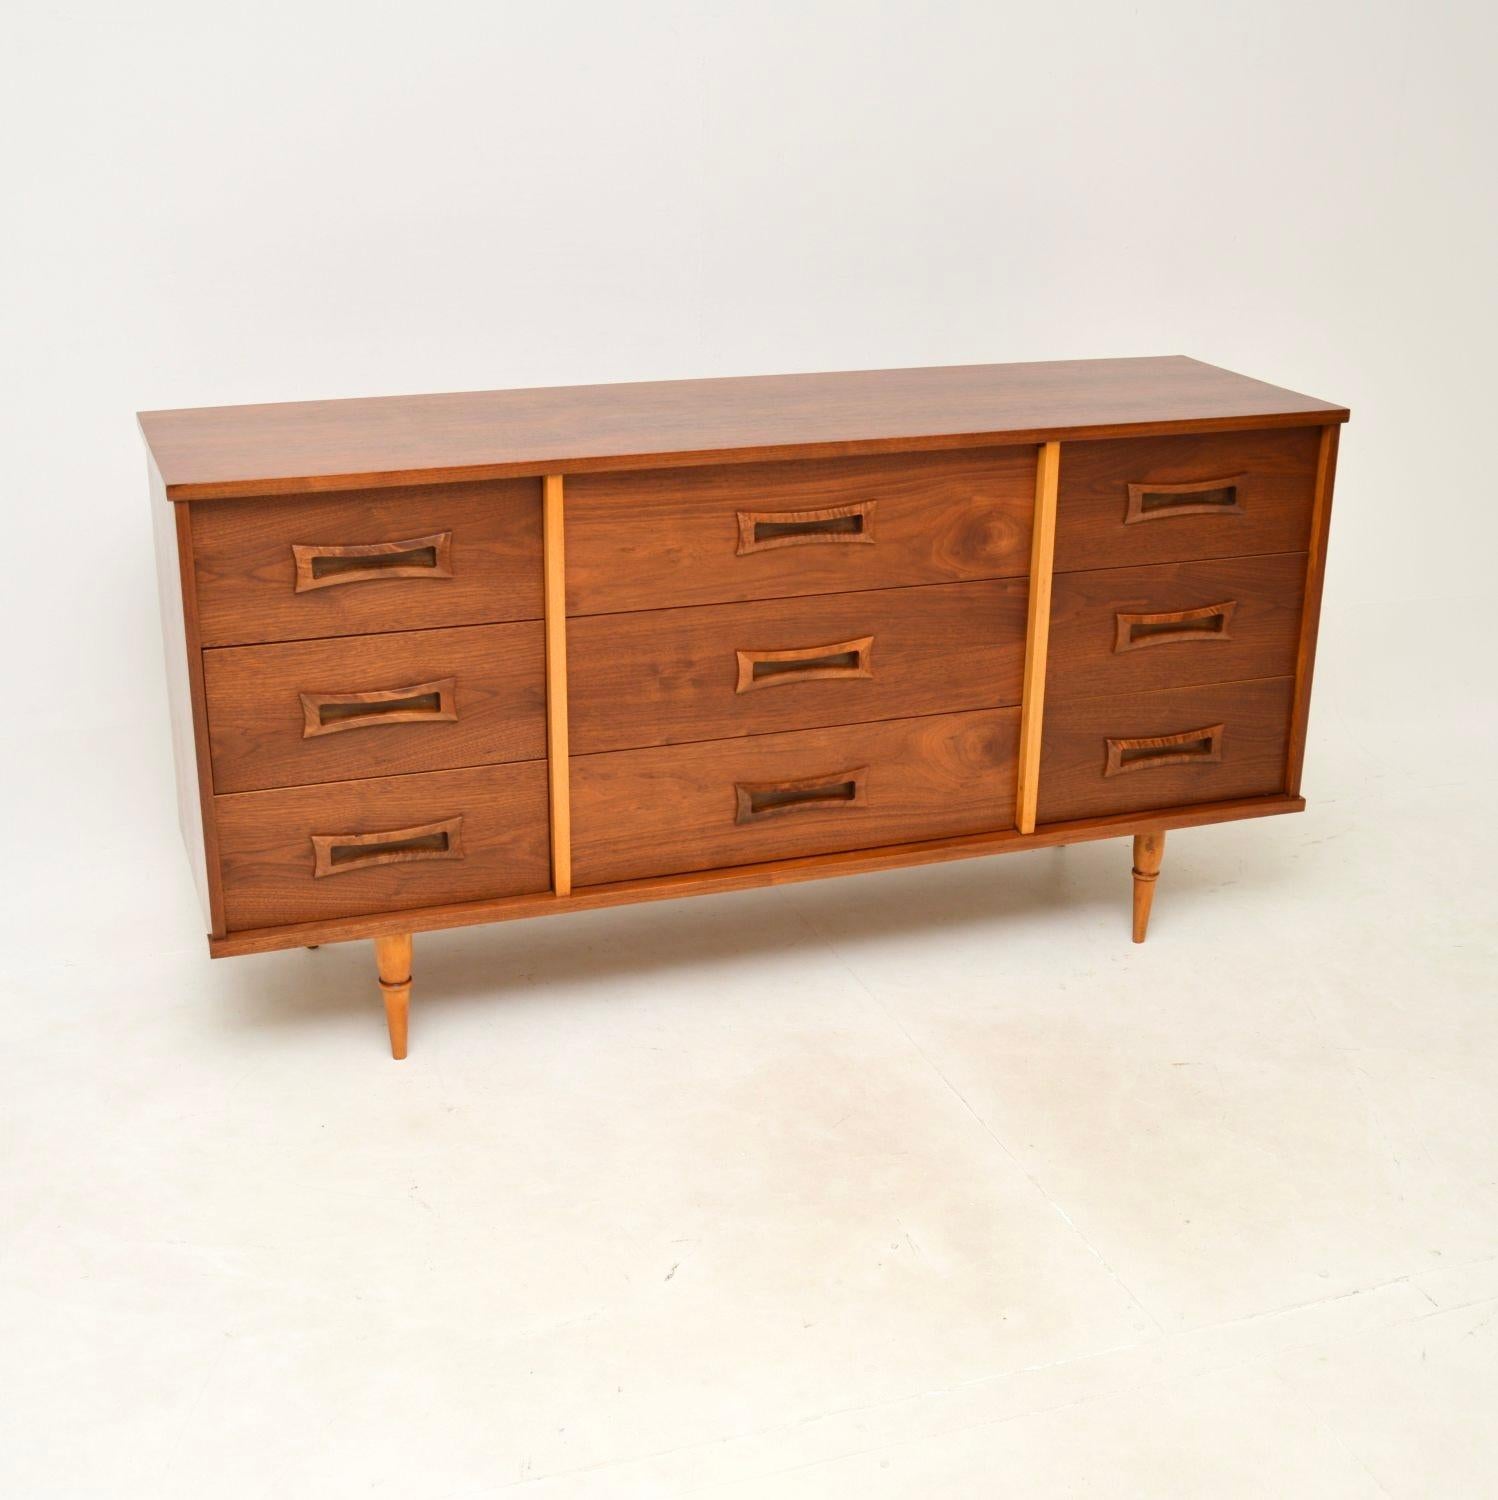 A very stylish and well made vintage walnut sideboard / chest of drawers. This was made in the USA, it dates from the 1960’s.

The quality is excellent, this is beautifully designed and has lots of storage space inside the six generous drawers. The